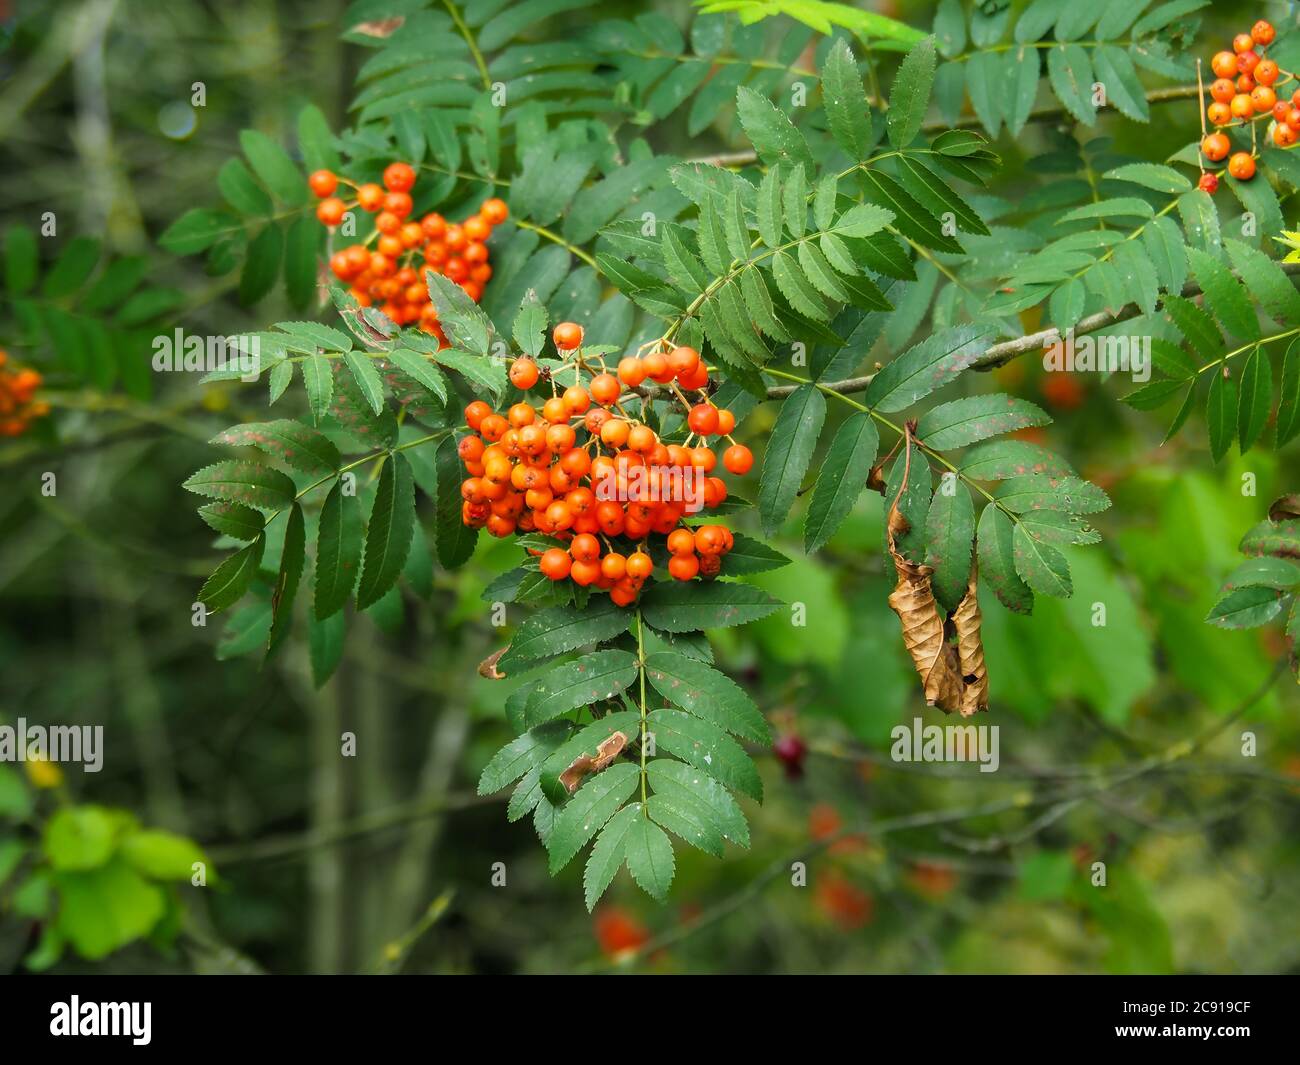 Red berries and green leaves on a rowan or mountain ash tree in late summer Stock Photo